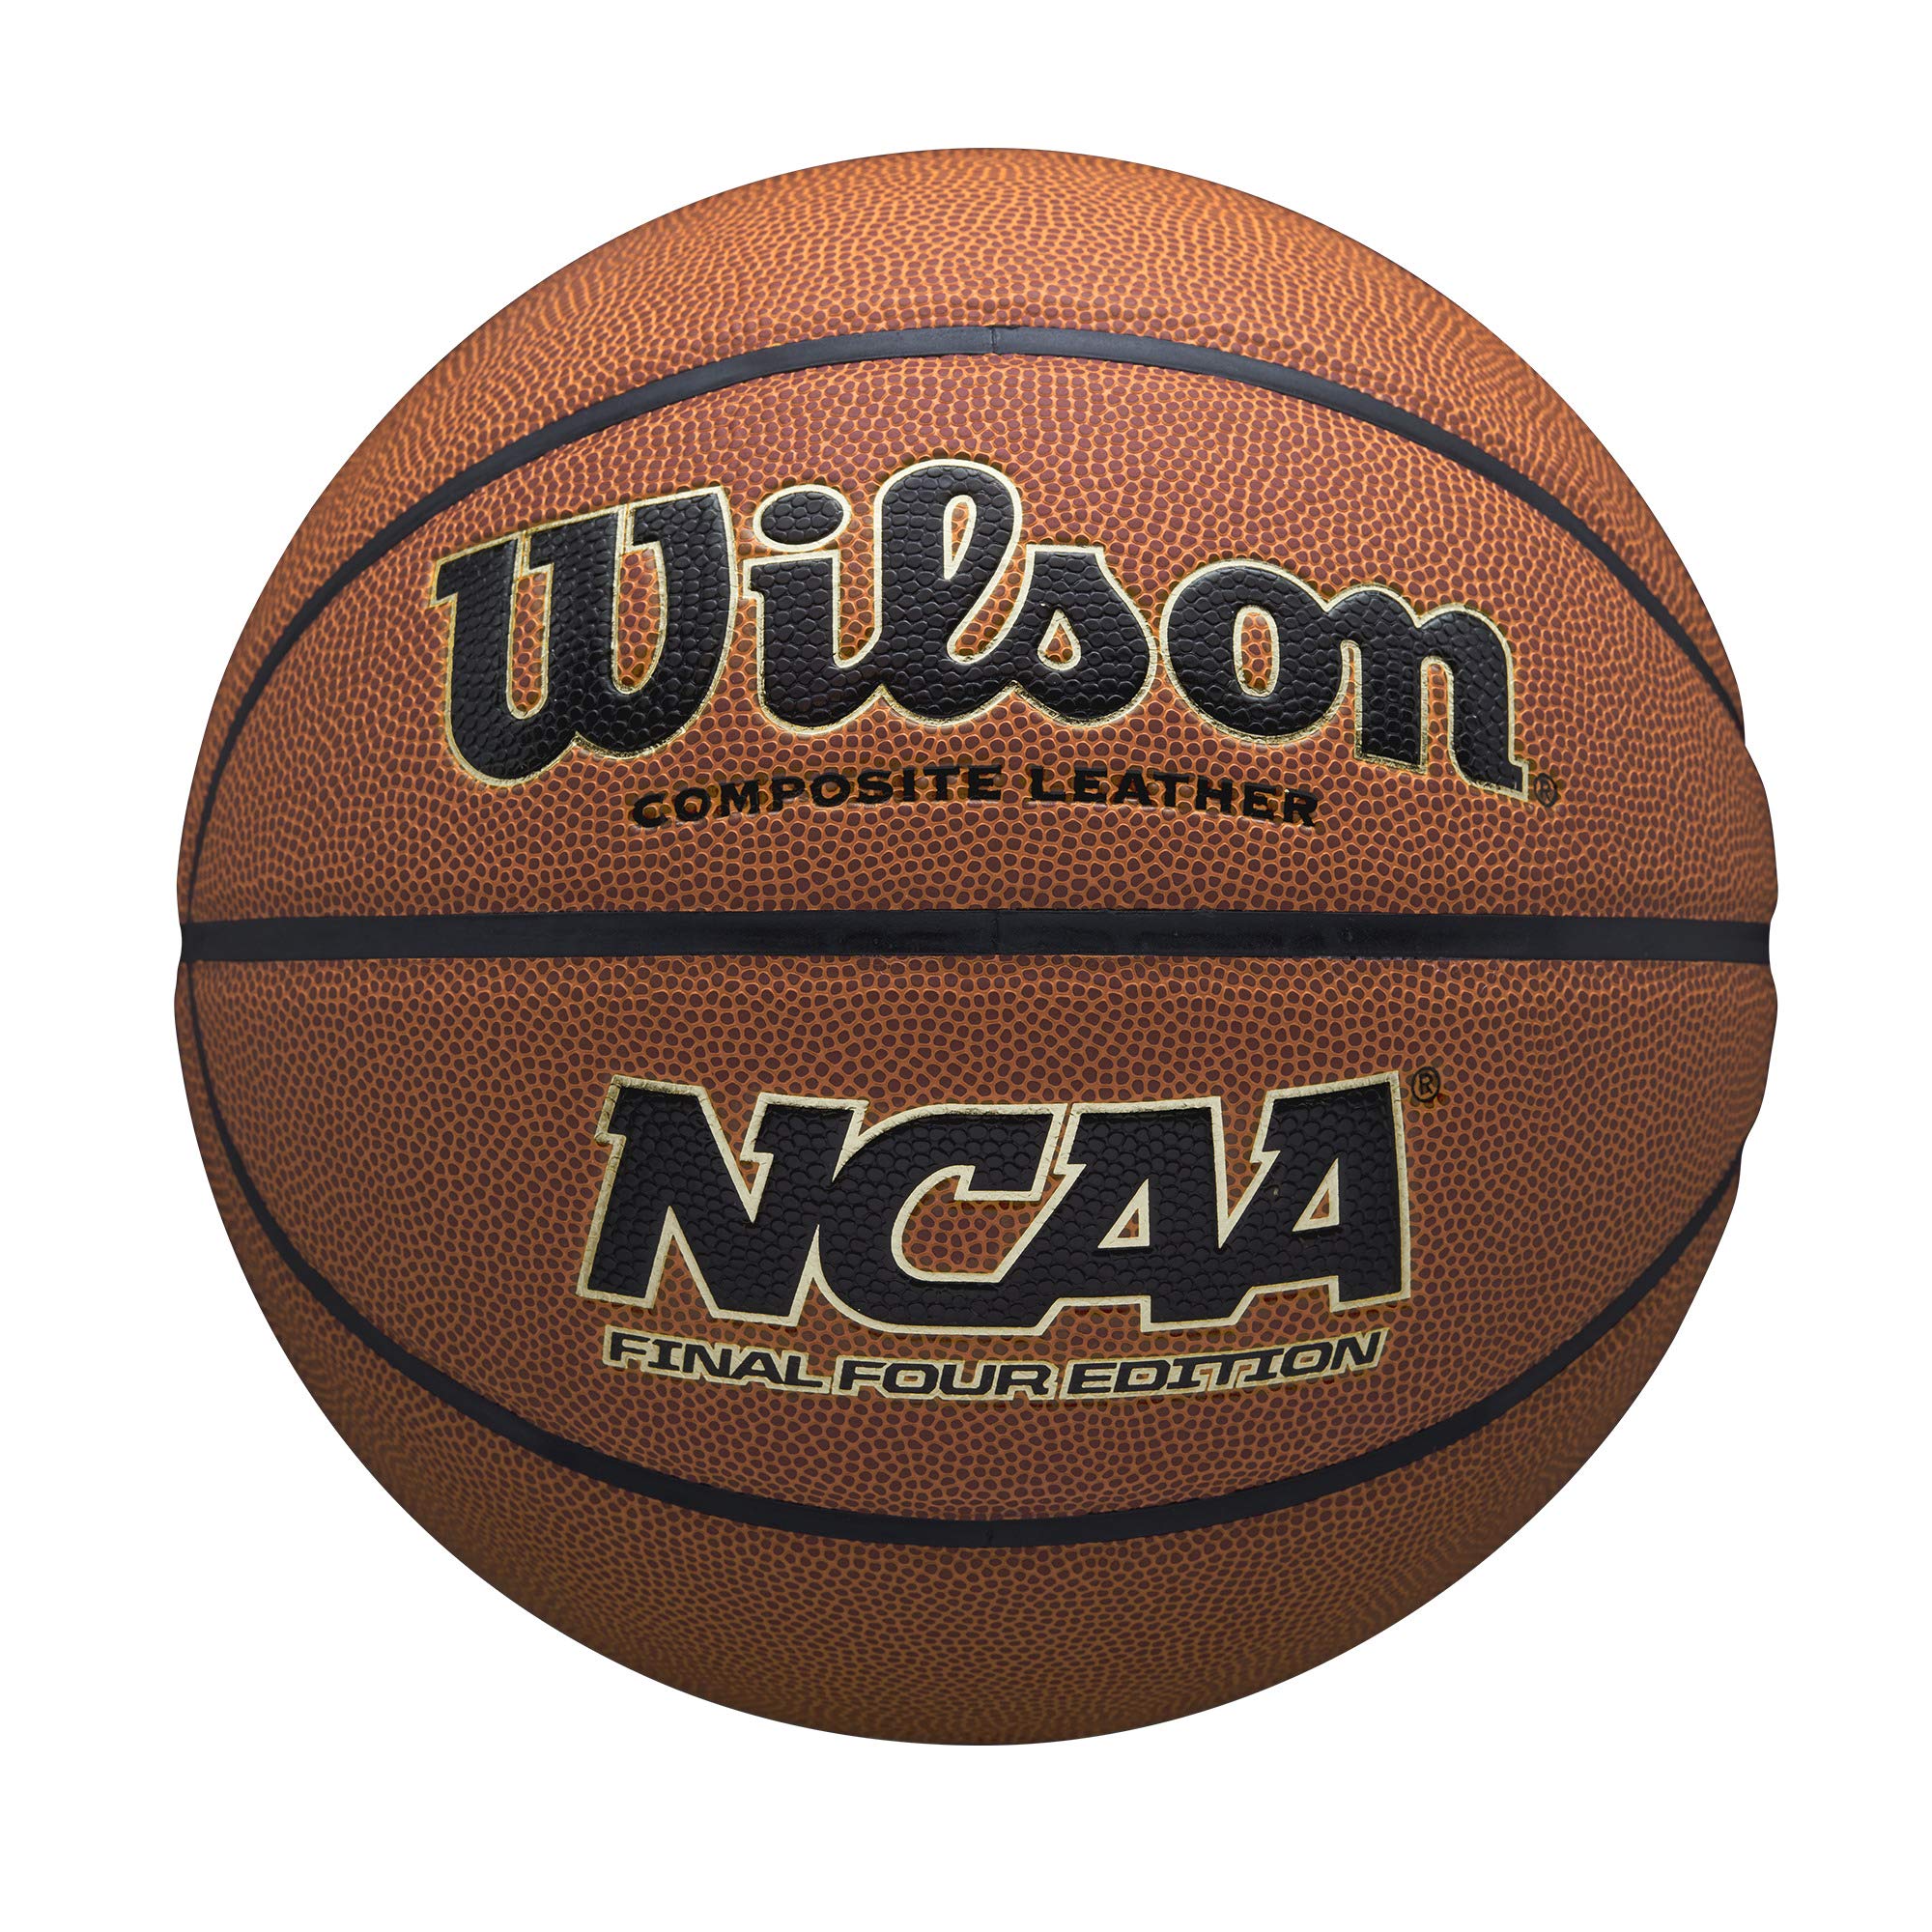 29.5" Wilson NCAA Final Four Edition Composite Leather Basketball (Brown) $19 + Free Shipping w/ Prime or on $35+